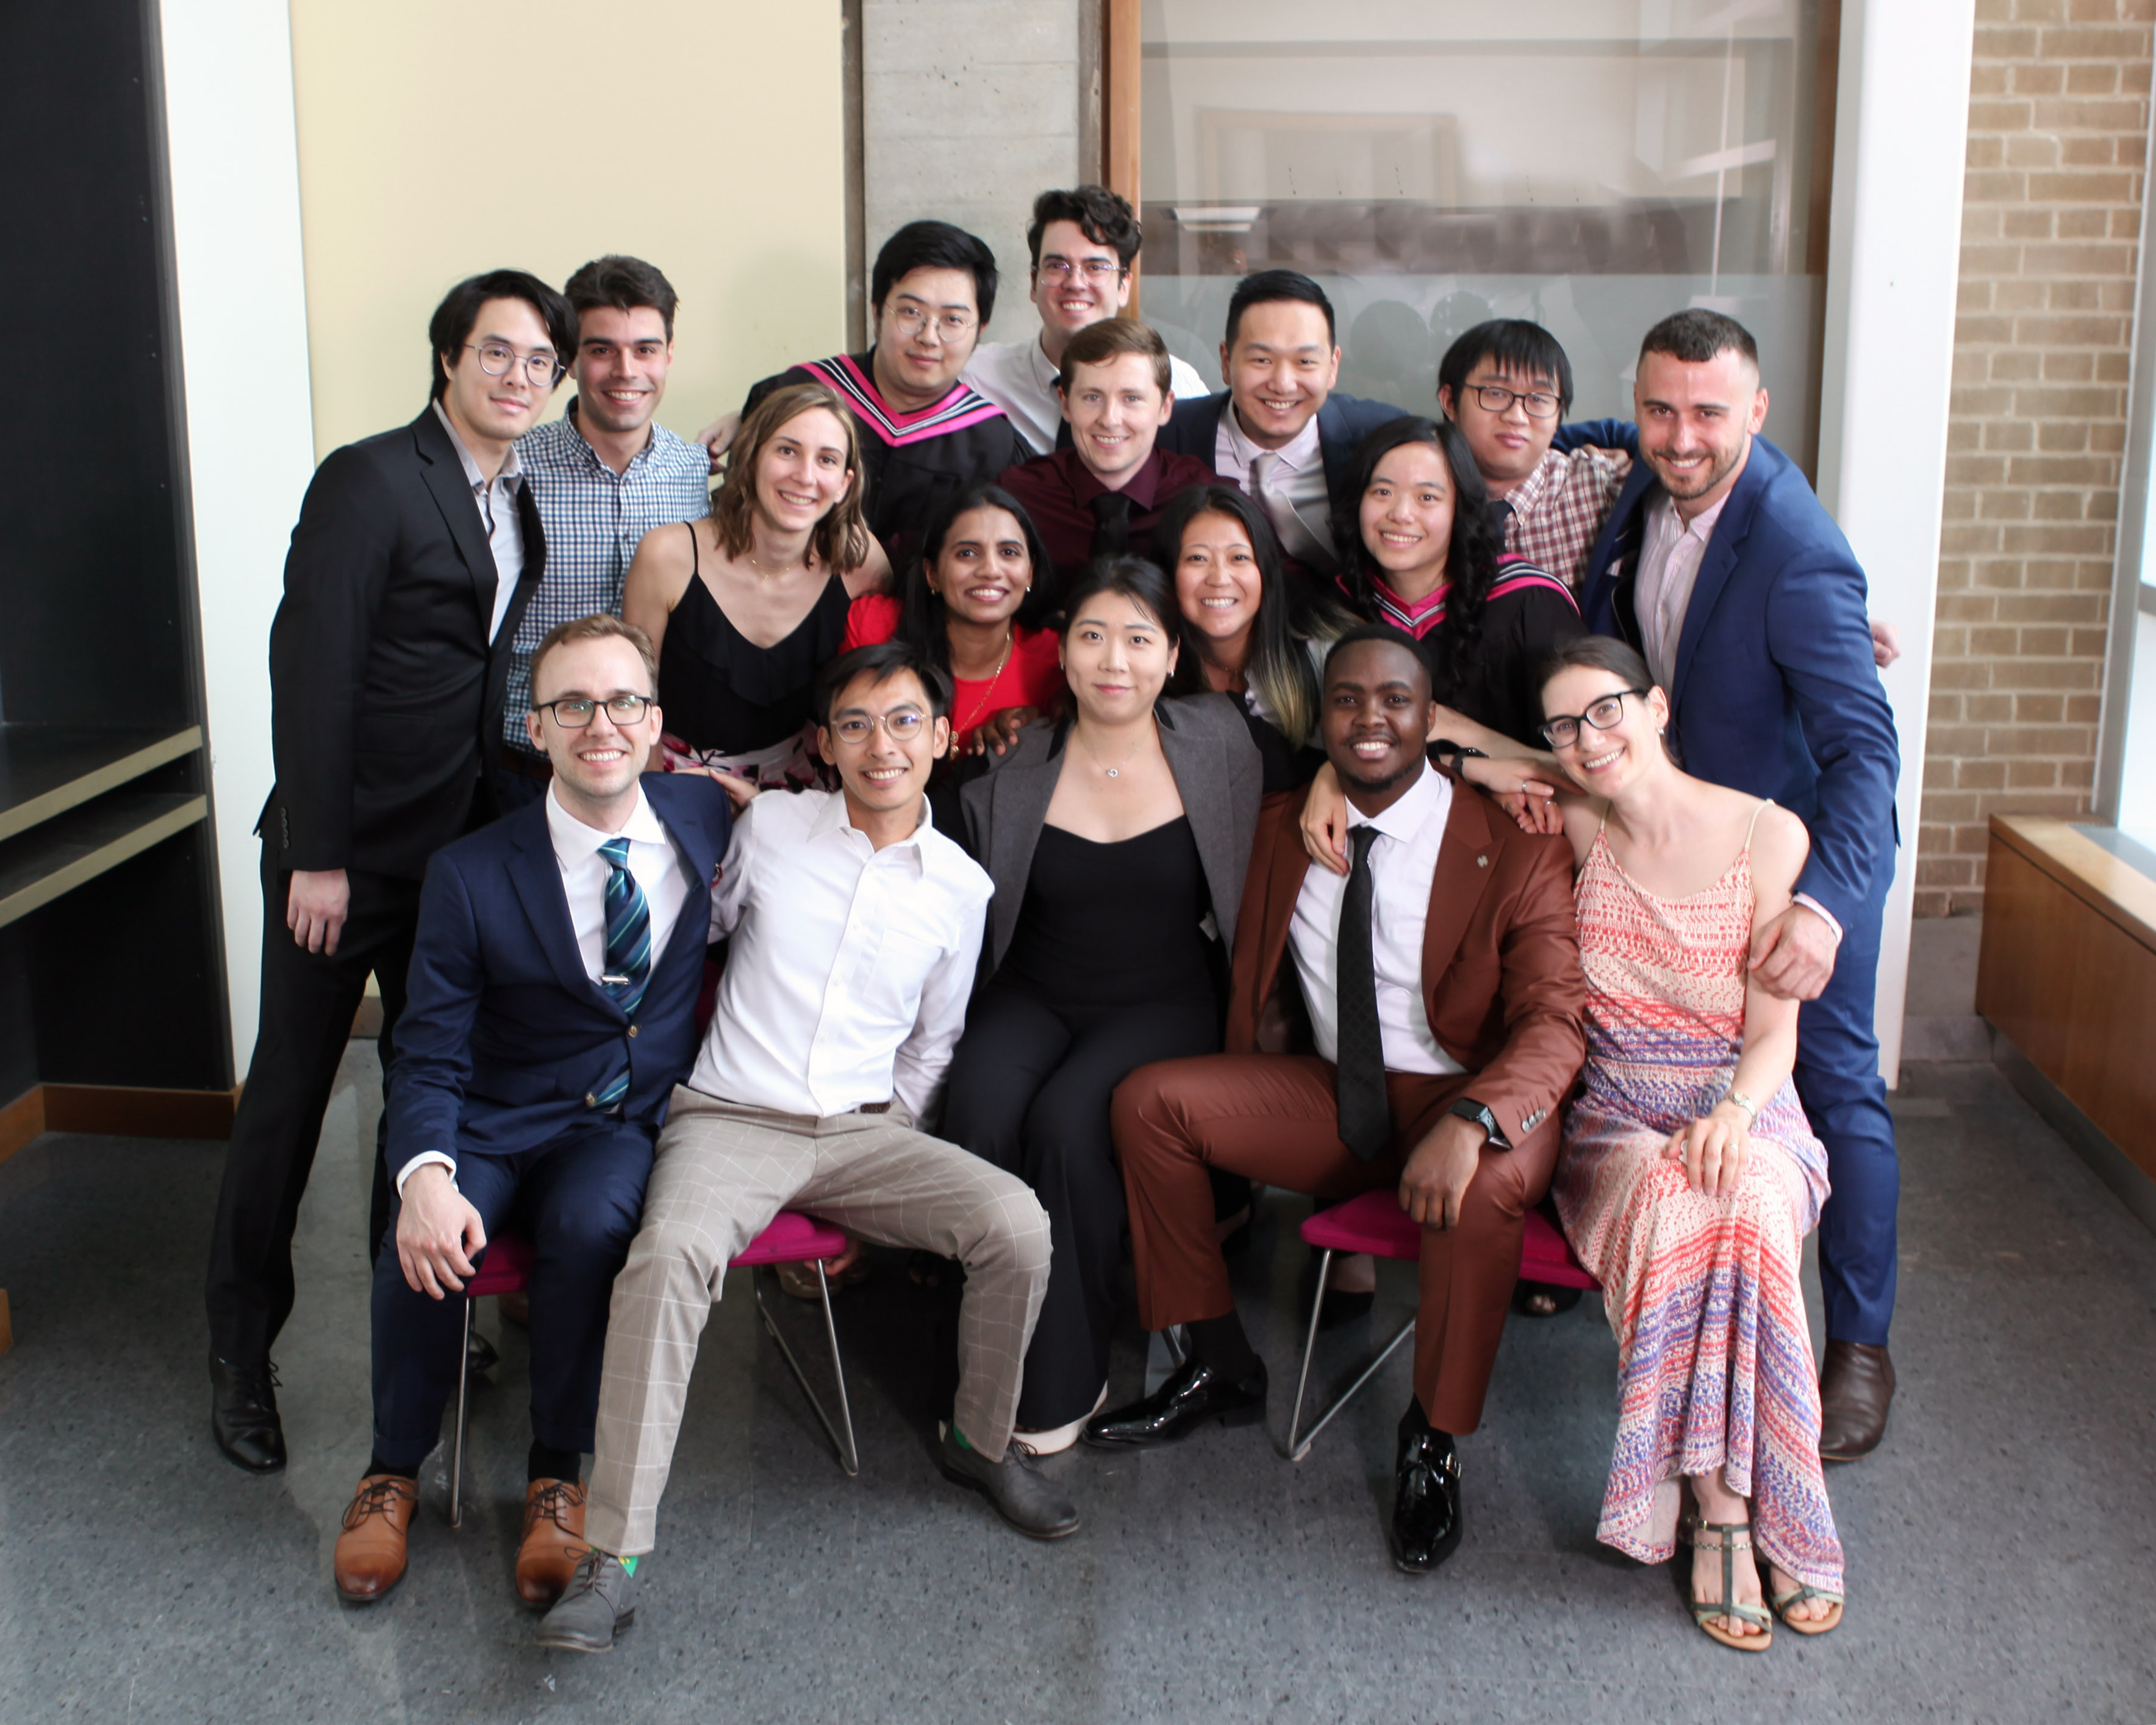 A group of 17 well-dressed adults clusters together, smiling at the camera.